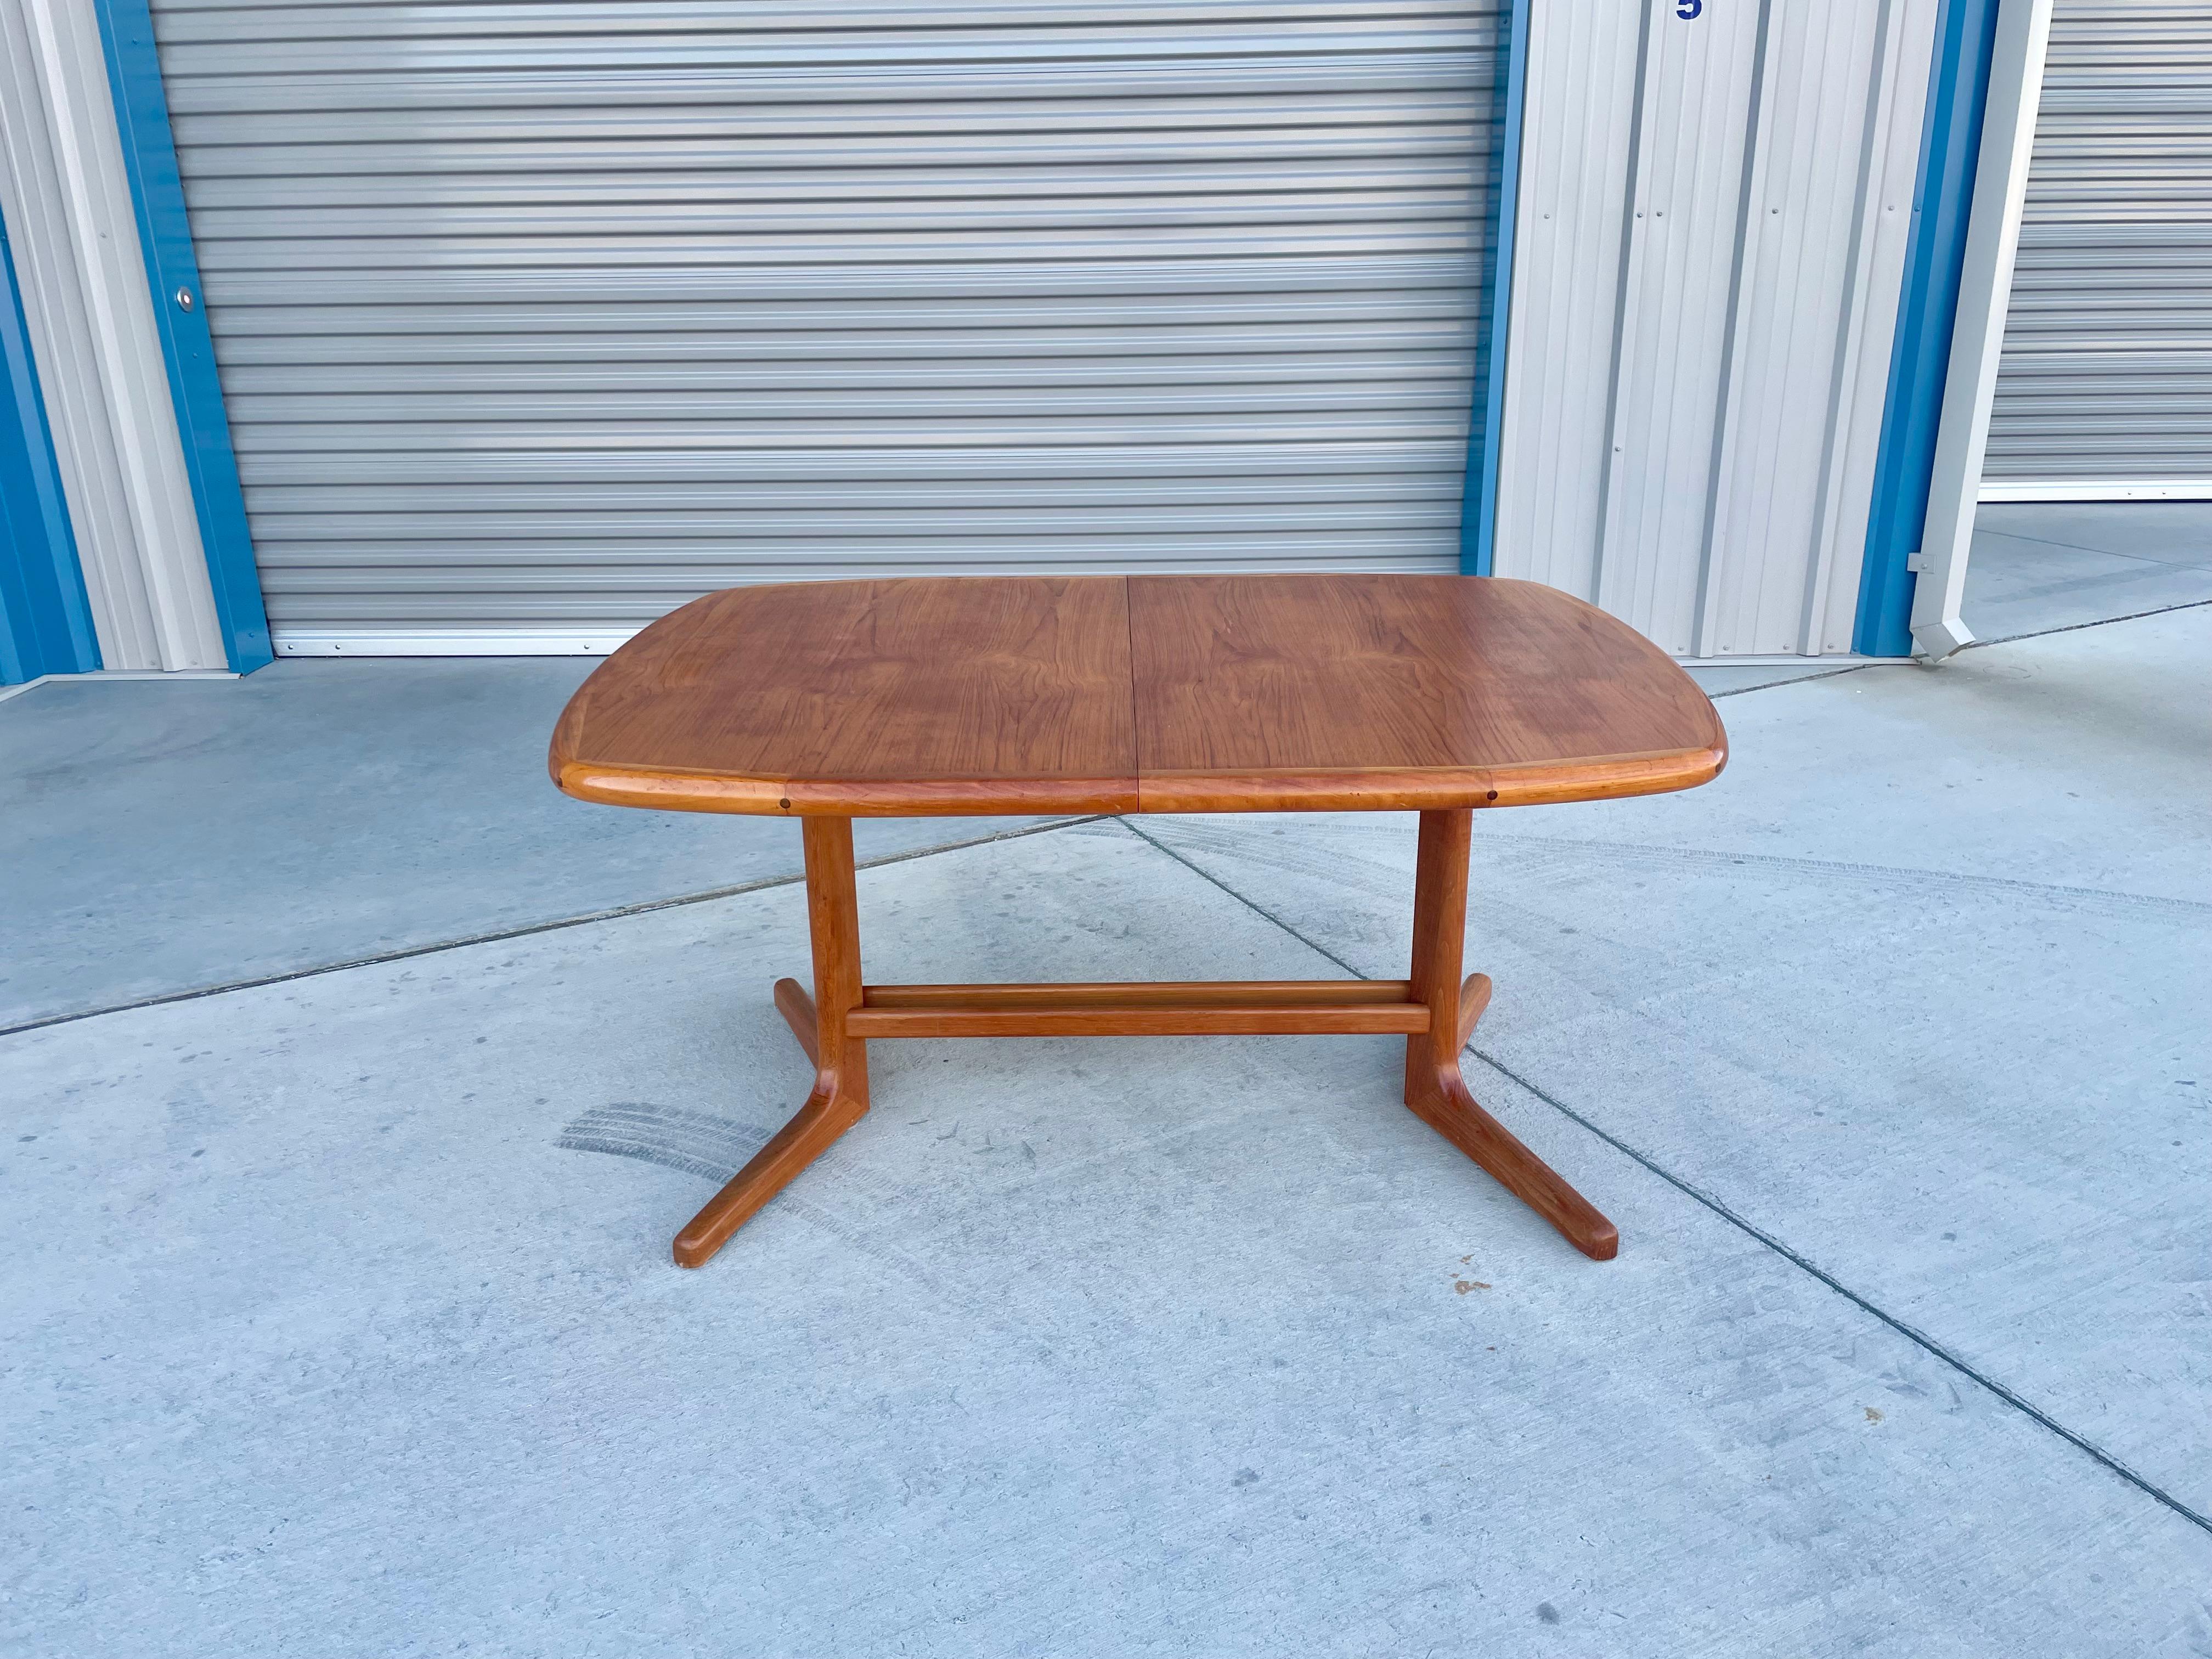 Danish modern teak dining table designed and manufactured in Denmark circa 1960s. This amazing dining table features an oval shape top that sits on top of a teak base. The table comes with two leaves, letting you extend the table, creating plenty of